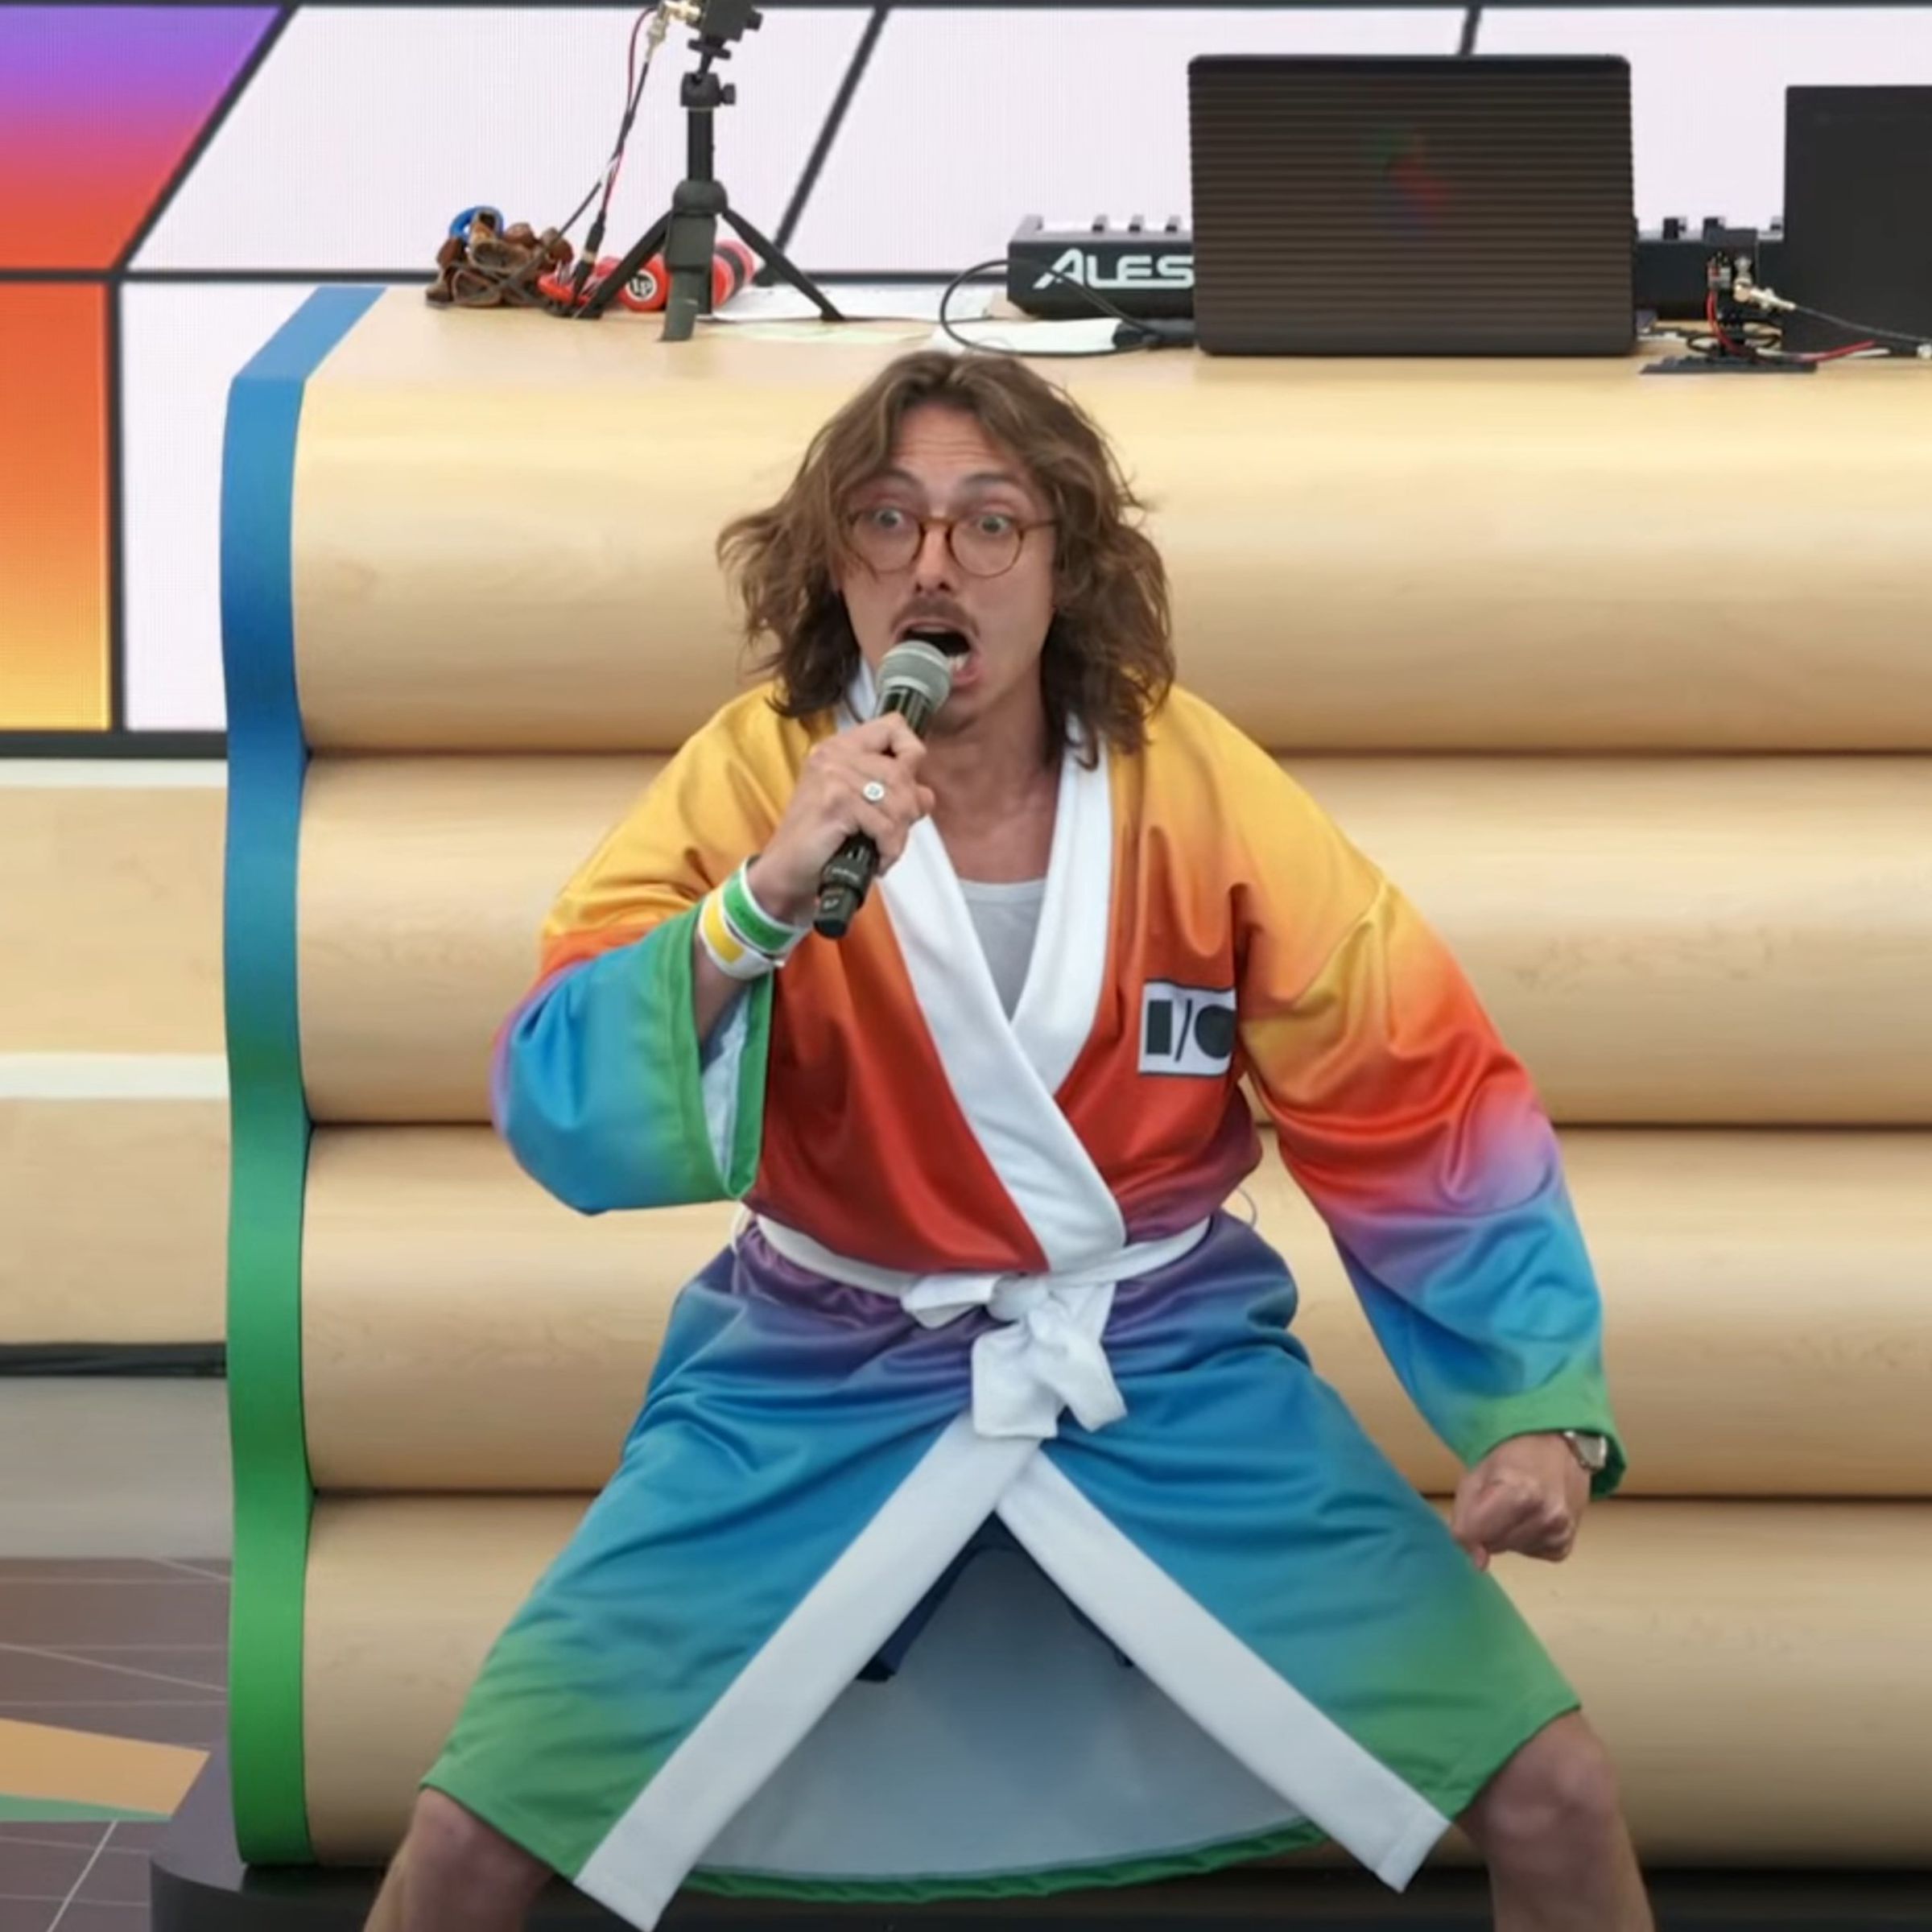 Marc Rebillet kicking off Google’s I/O event in a rainbow-colored bath robe